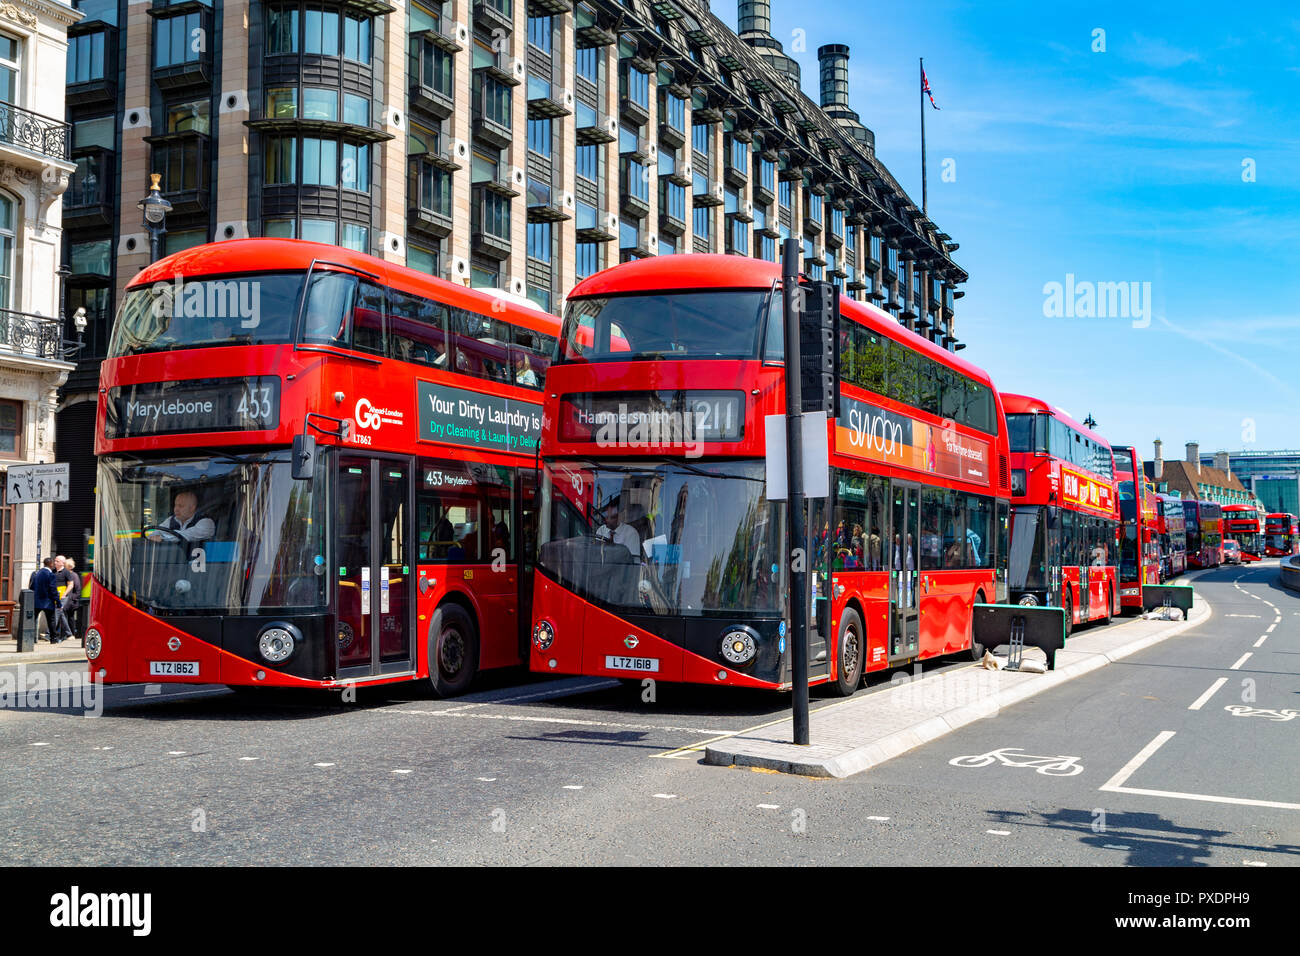 London, England, UK. Double-decker tourist sightseeing bus in Parliament Square Stock Photo